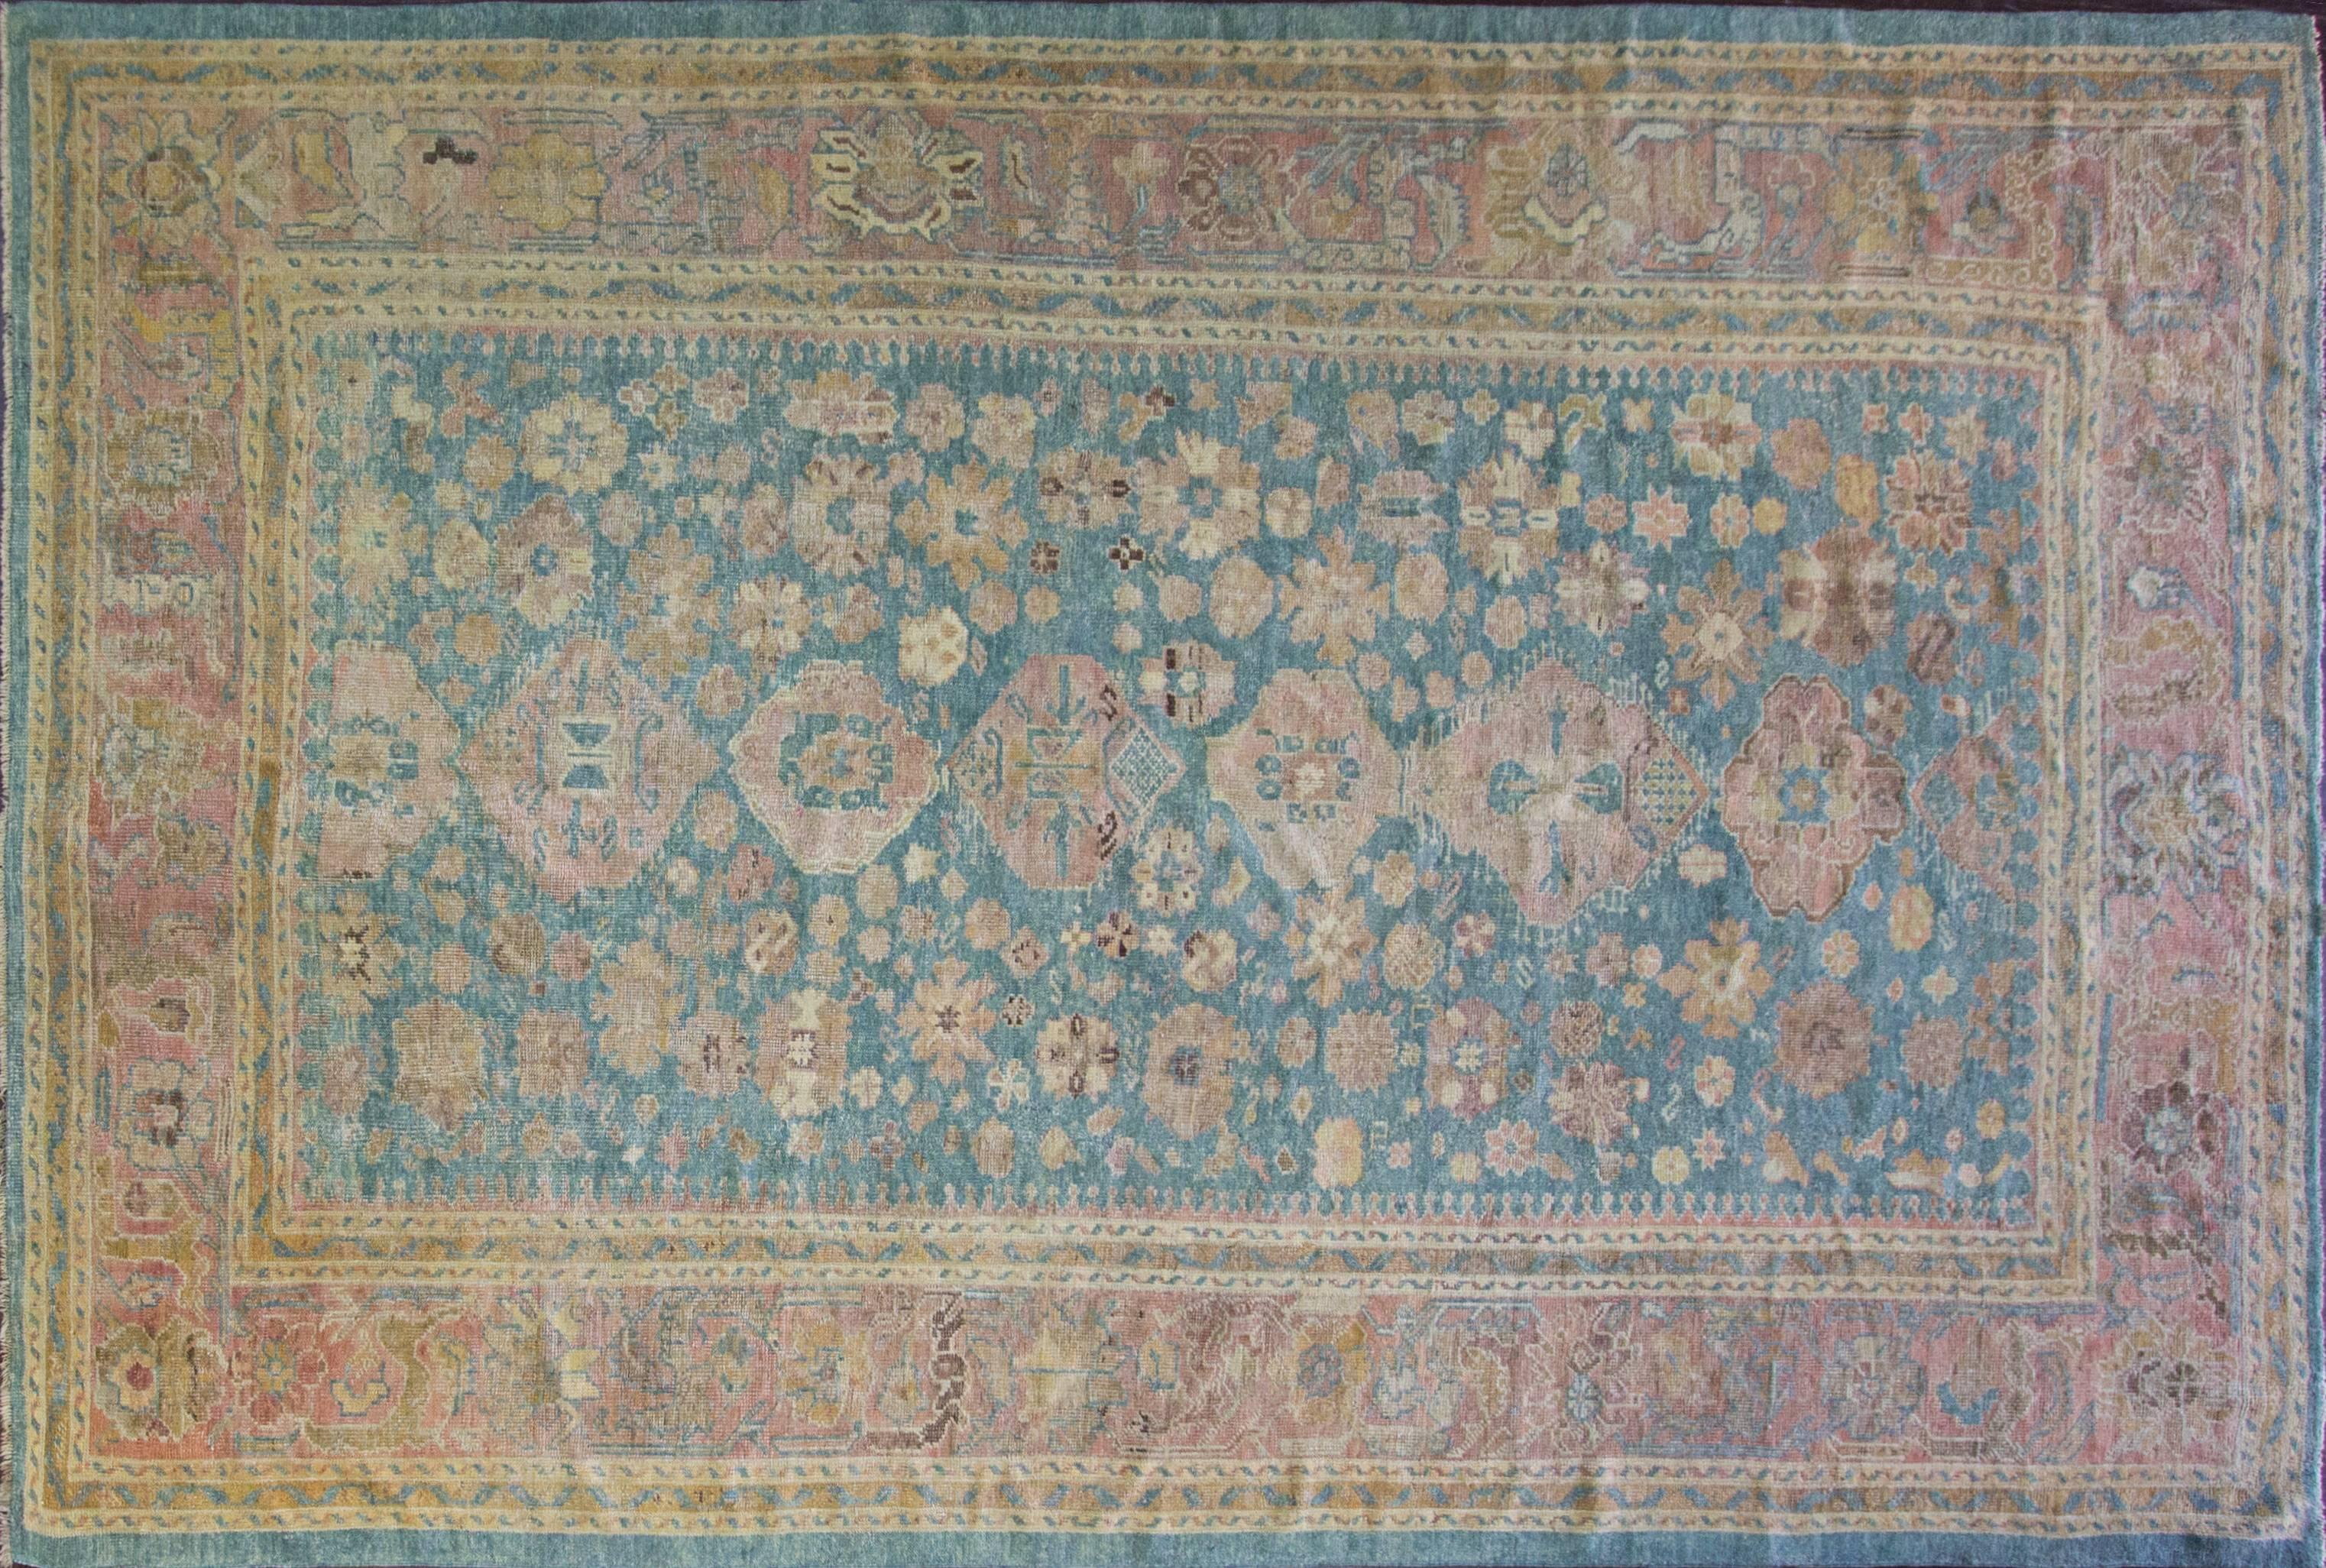 Pleasant and amazing antique Oushak carpet with unique colors and excellent size with great fine weave.
Ushak rugs have been in production since the 15th century with superb wool and natural dyes. Unlike other Turkish rugs, Ushak rugs influenced